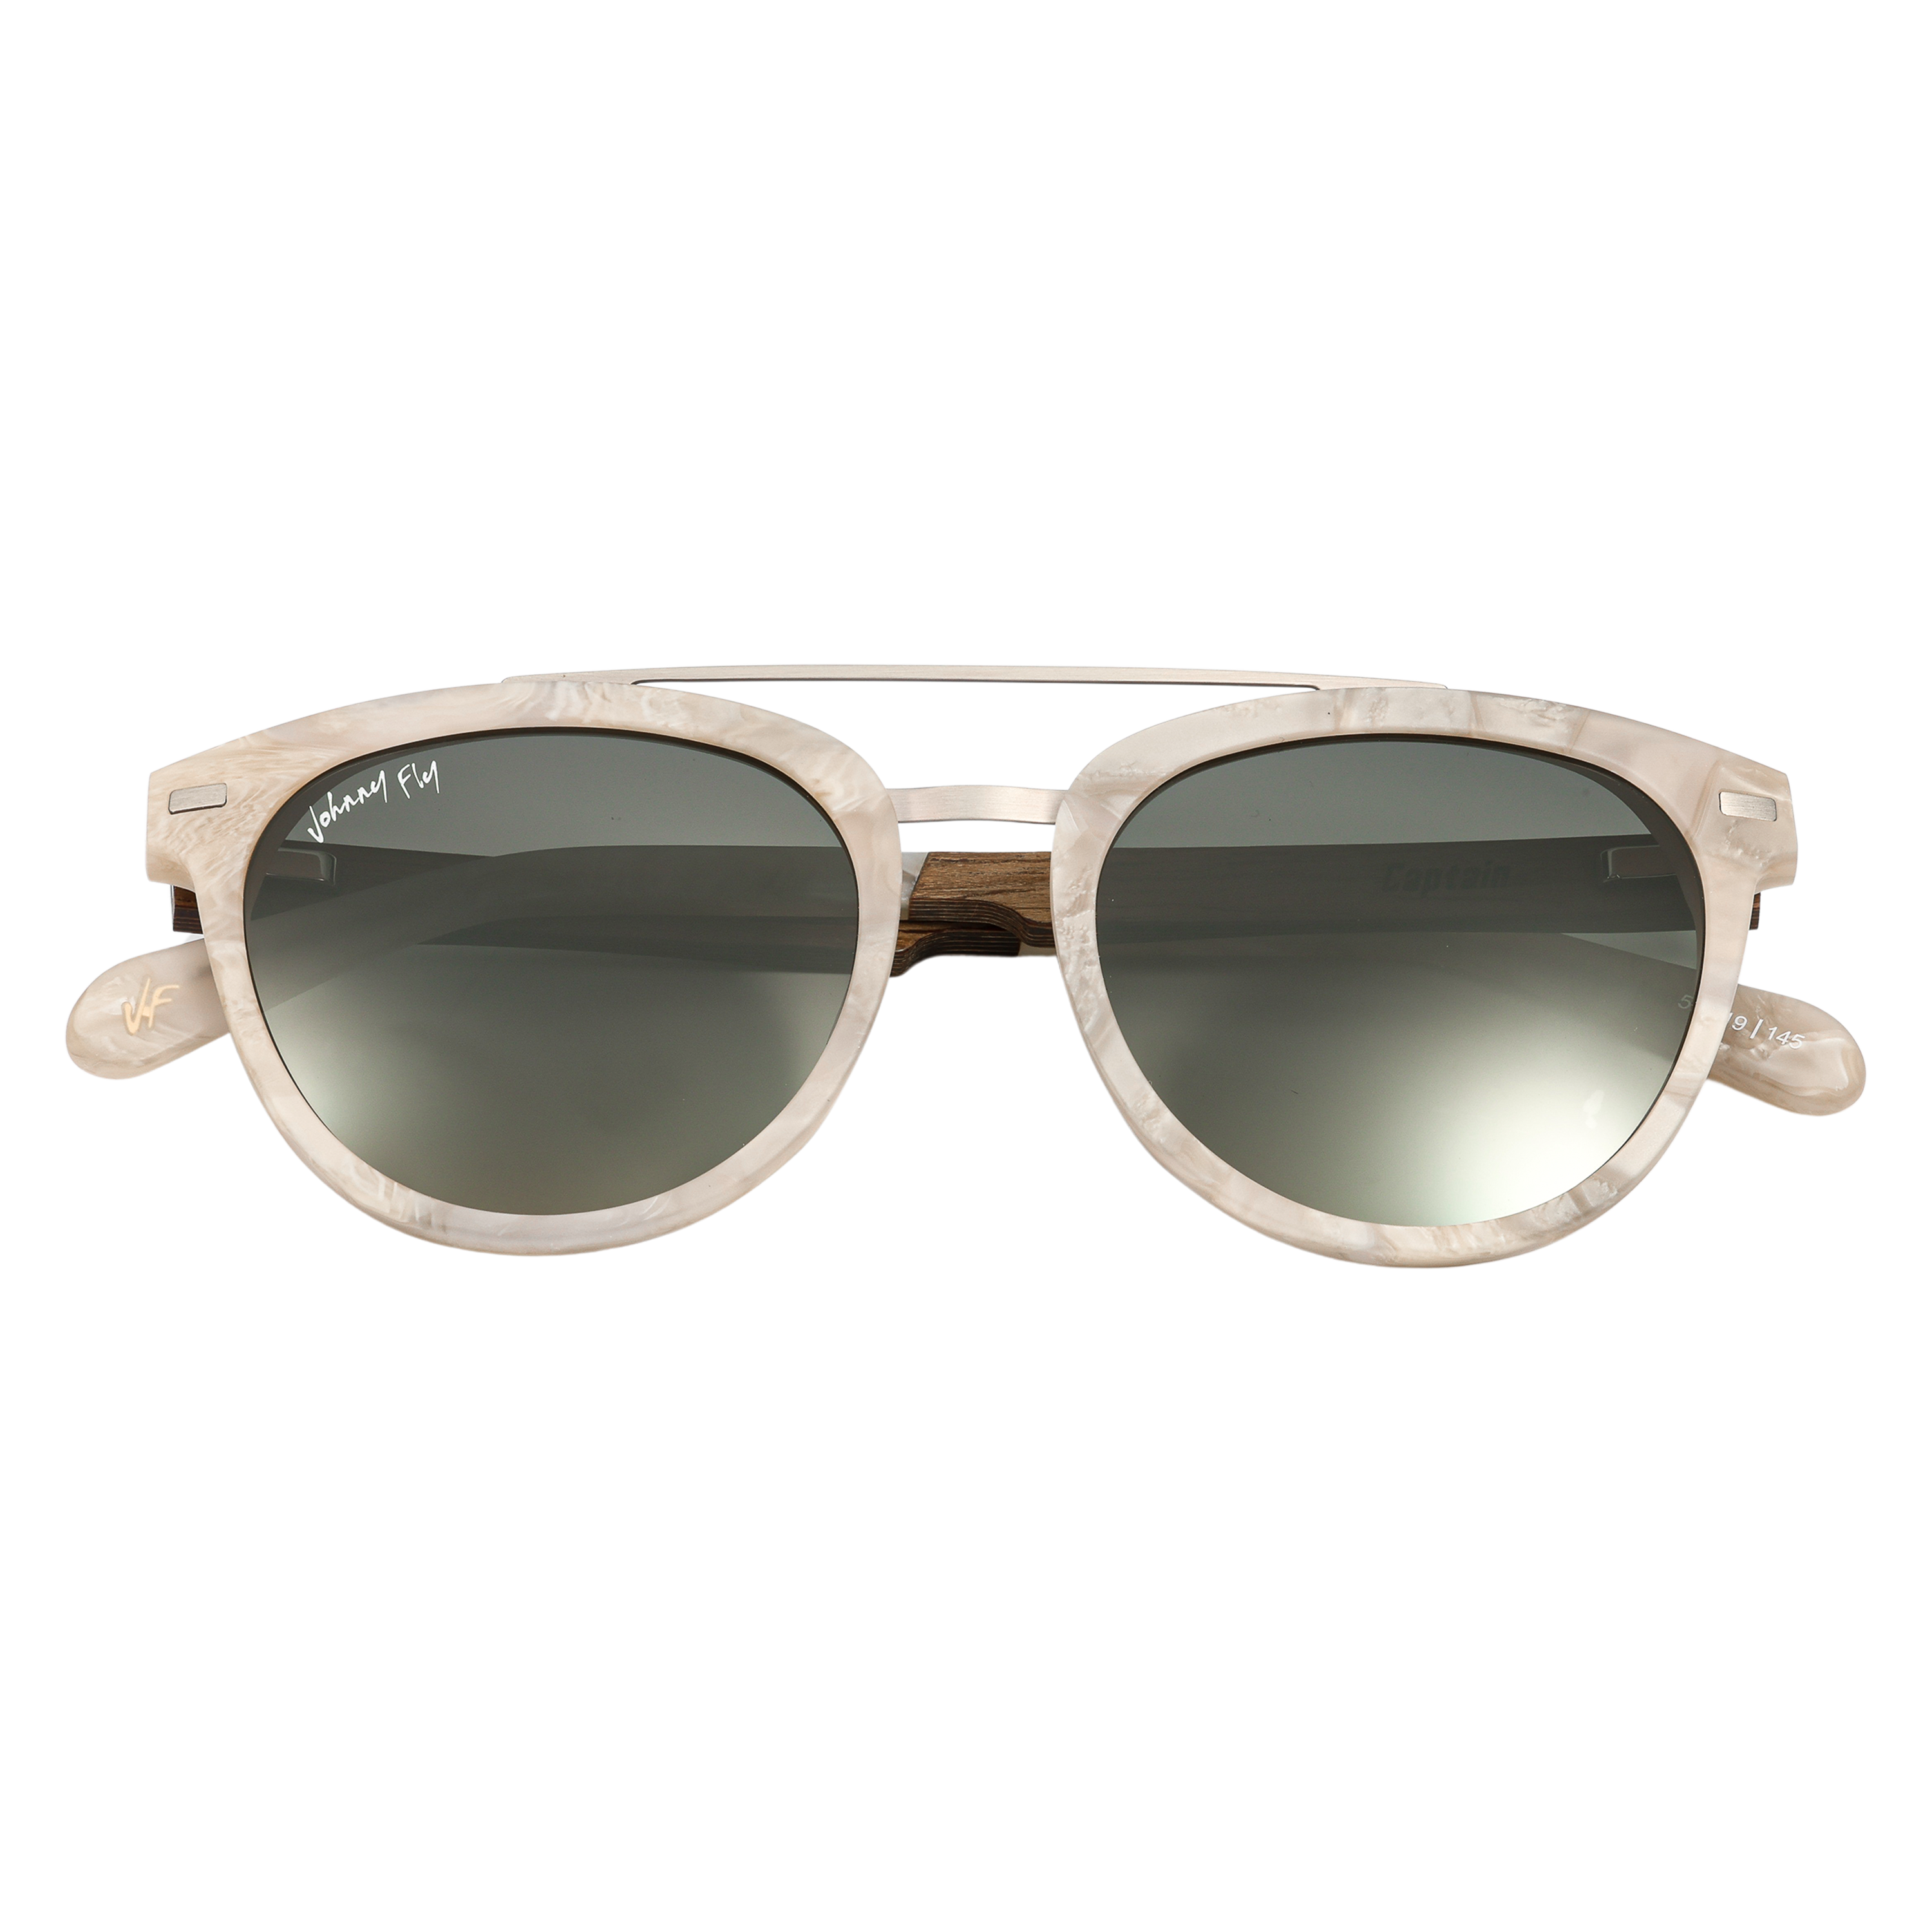 Captain METEOR Crossbar Aviator Polarized Sunglasses by Johnny Fly | Handcrafted with Acetate and Wood 